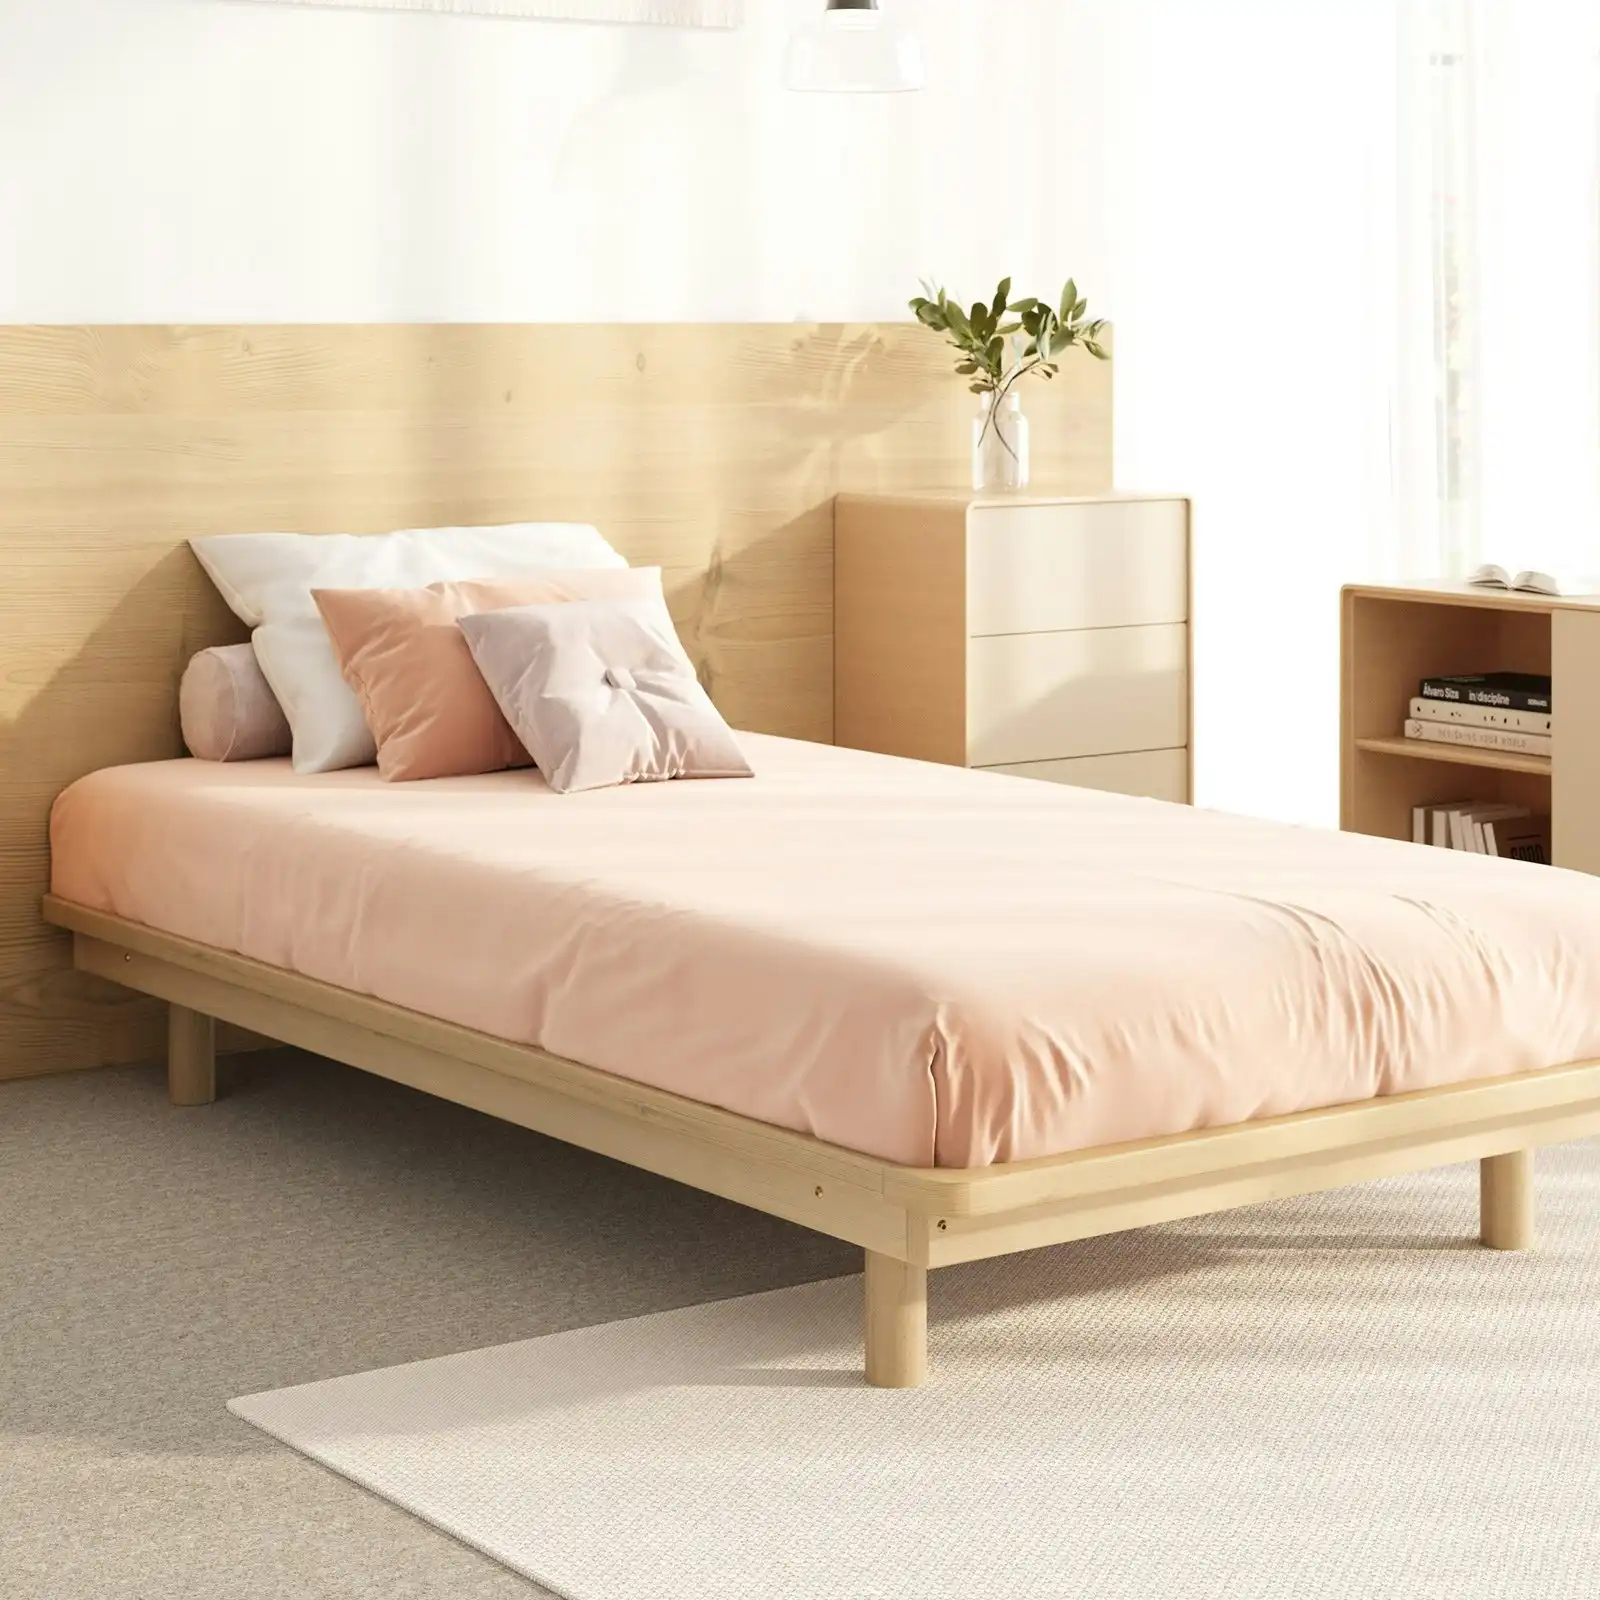 Oikiture Bed Frame King Single Size Wooden Bed Base Floating